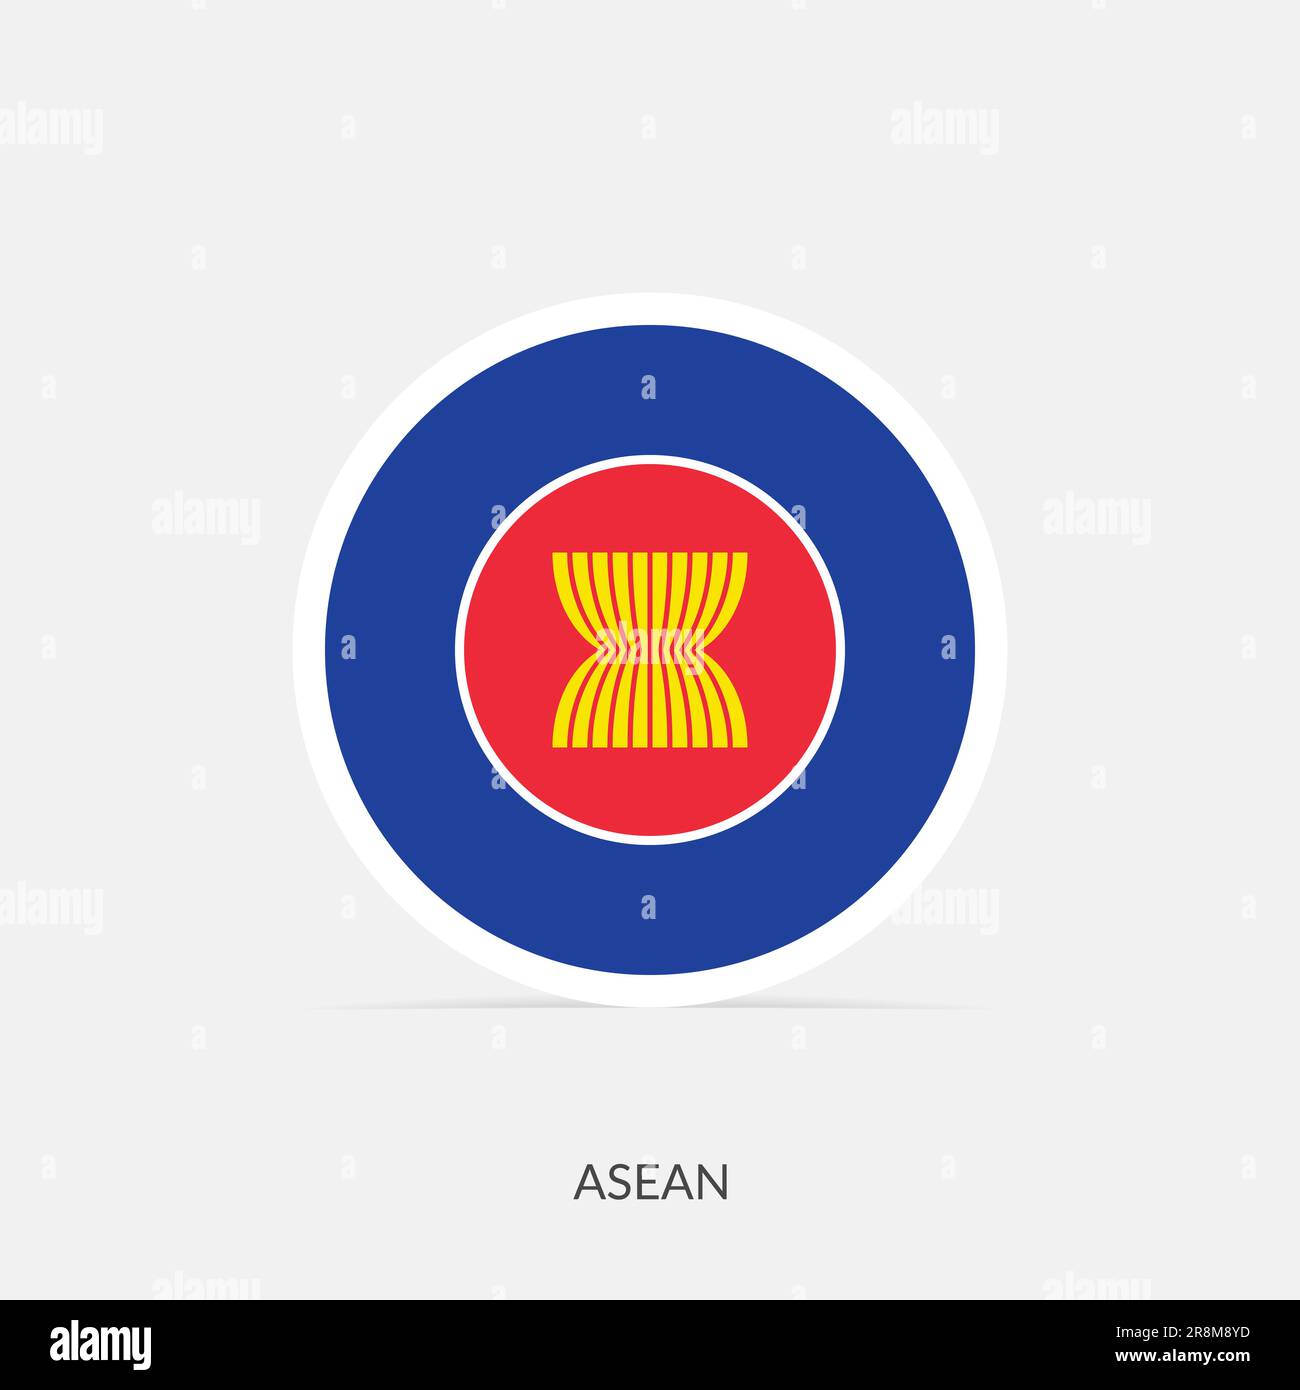 ASEAN round flag icon with shadow. Stock Vector